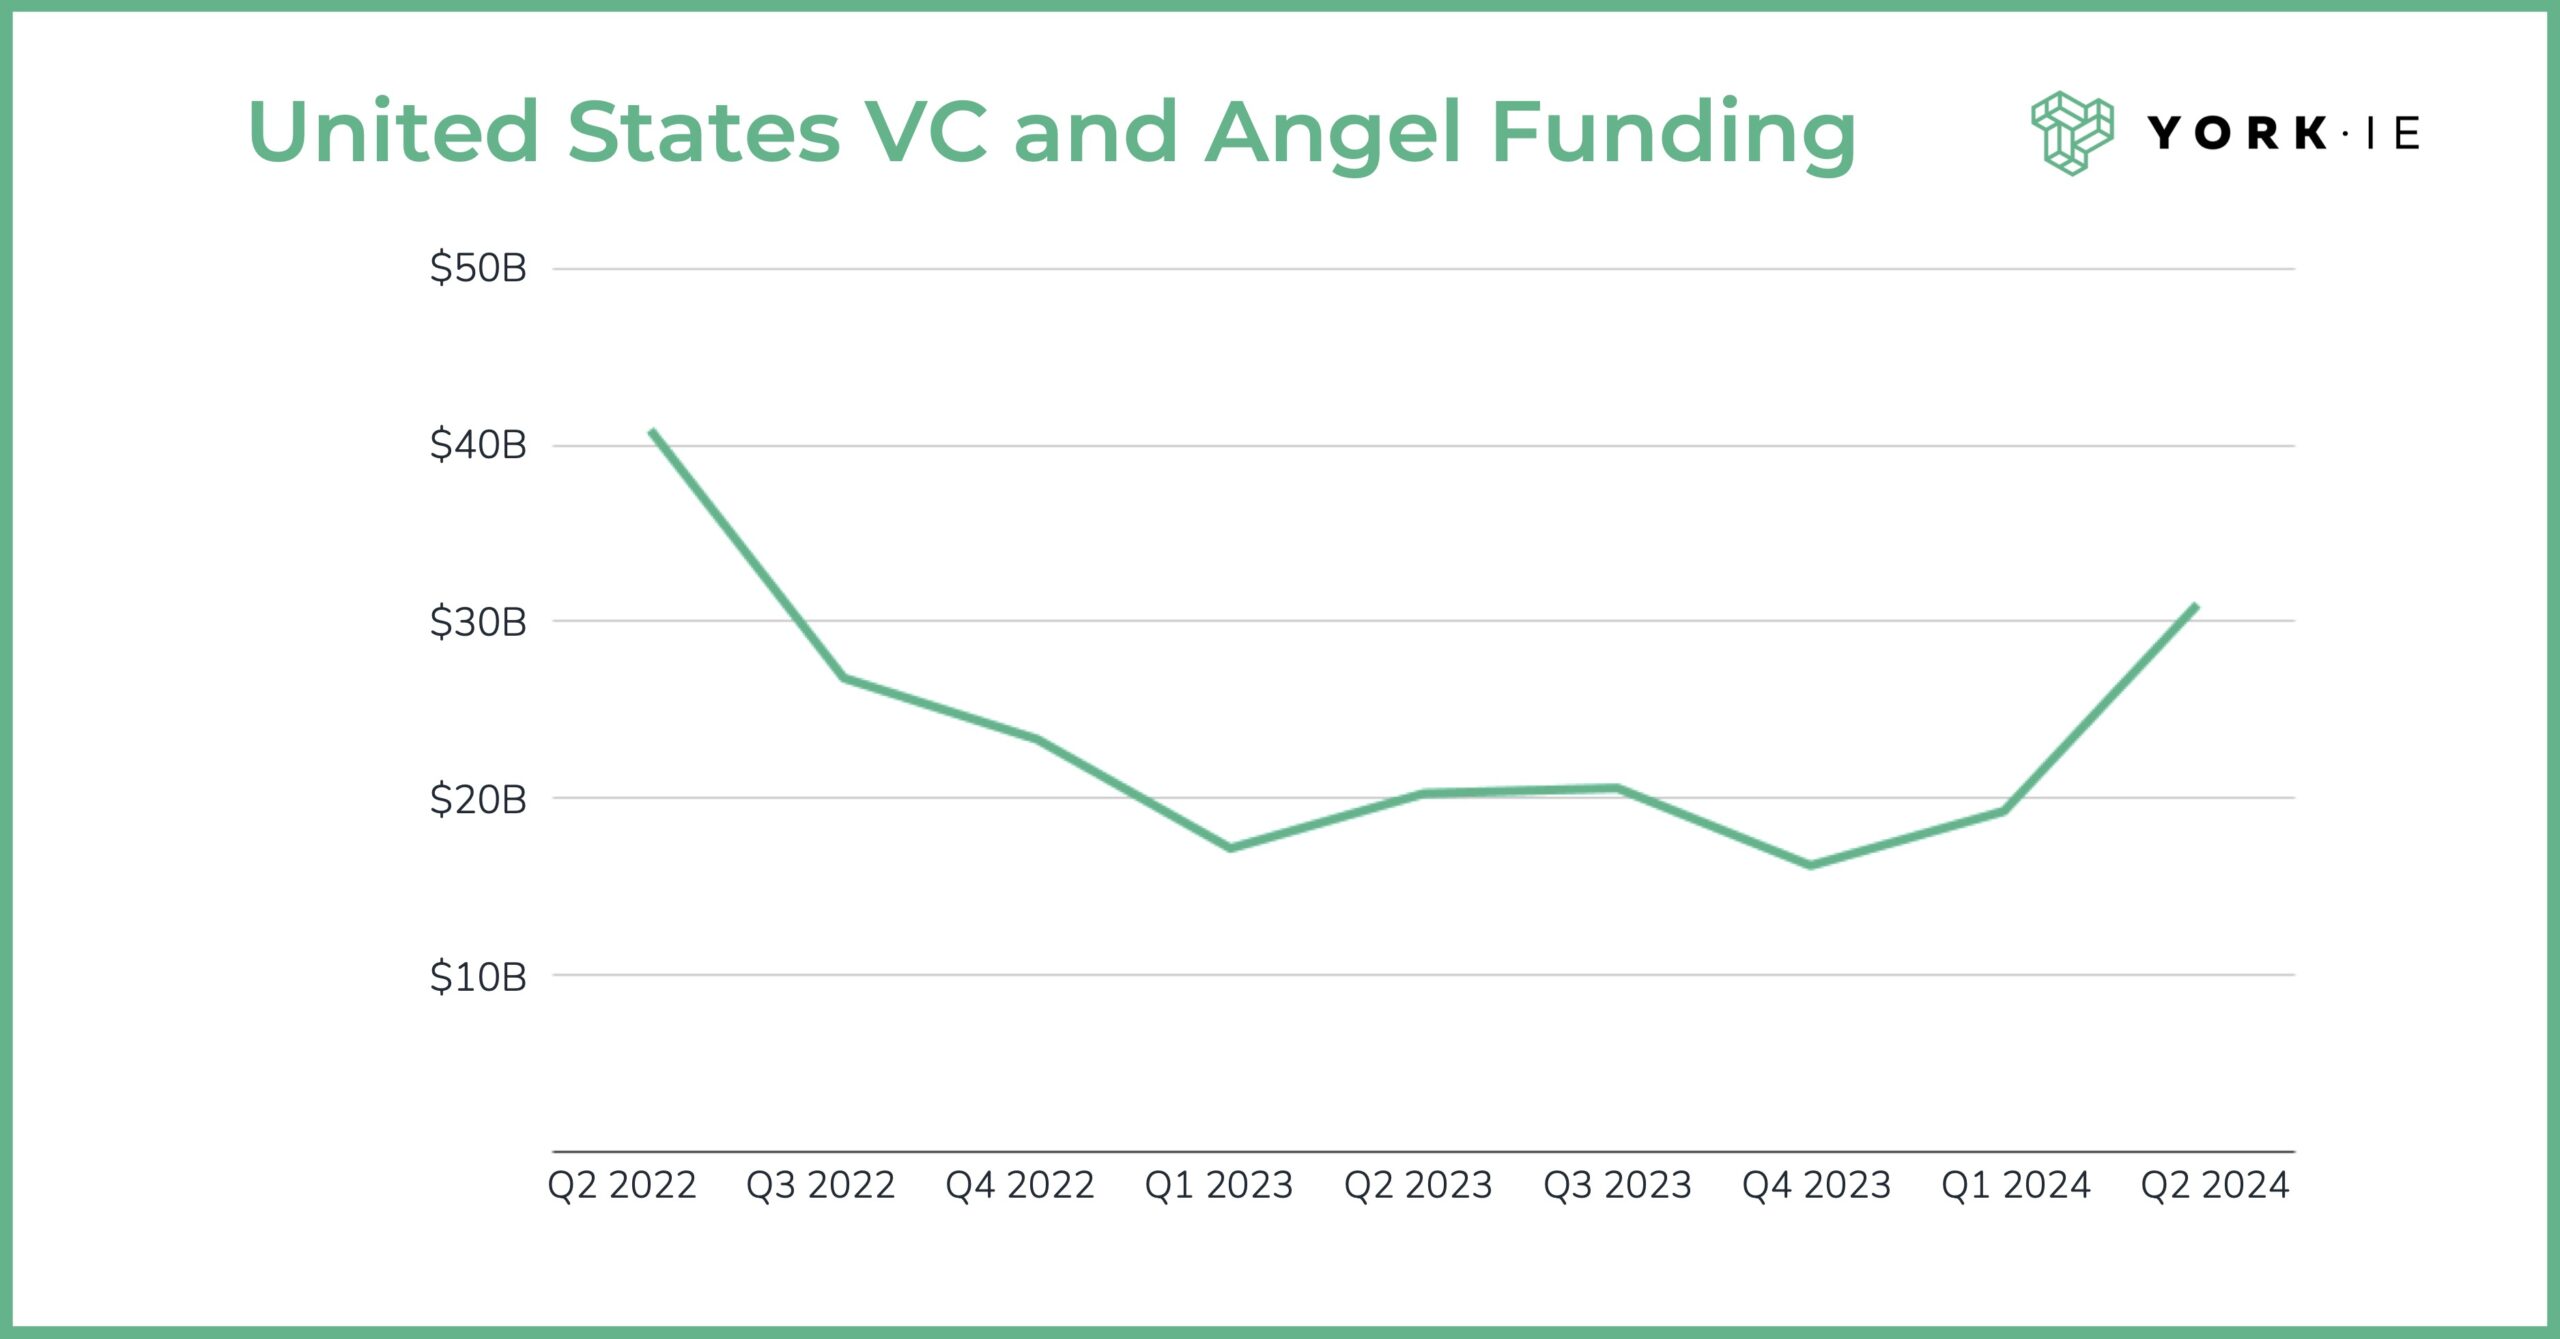 angel and venture capital investment in U.S. startups by quarter, Q2 2022 to Q2 2024